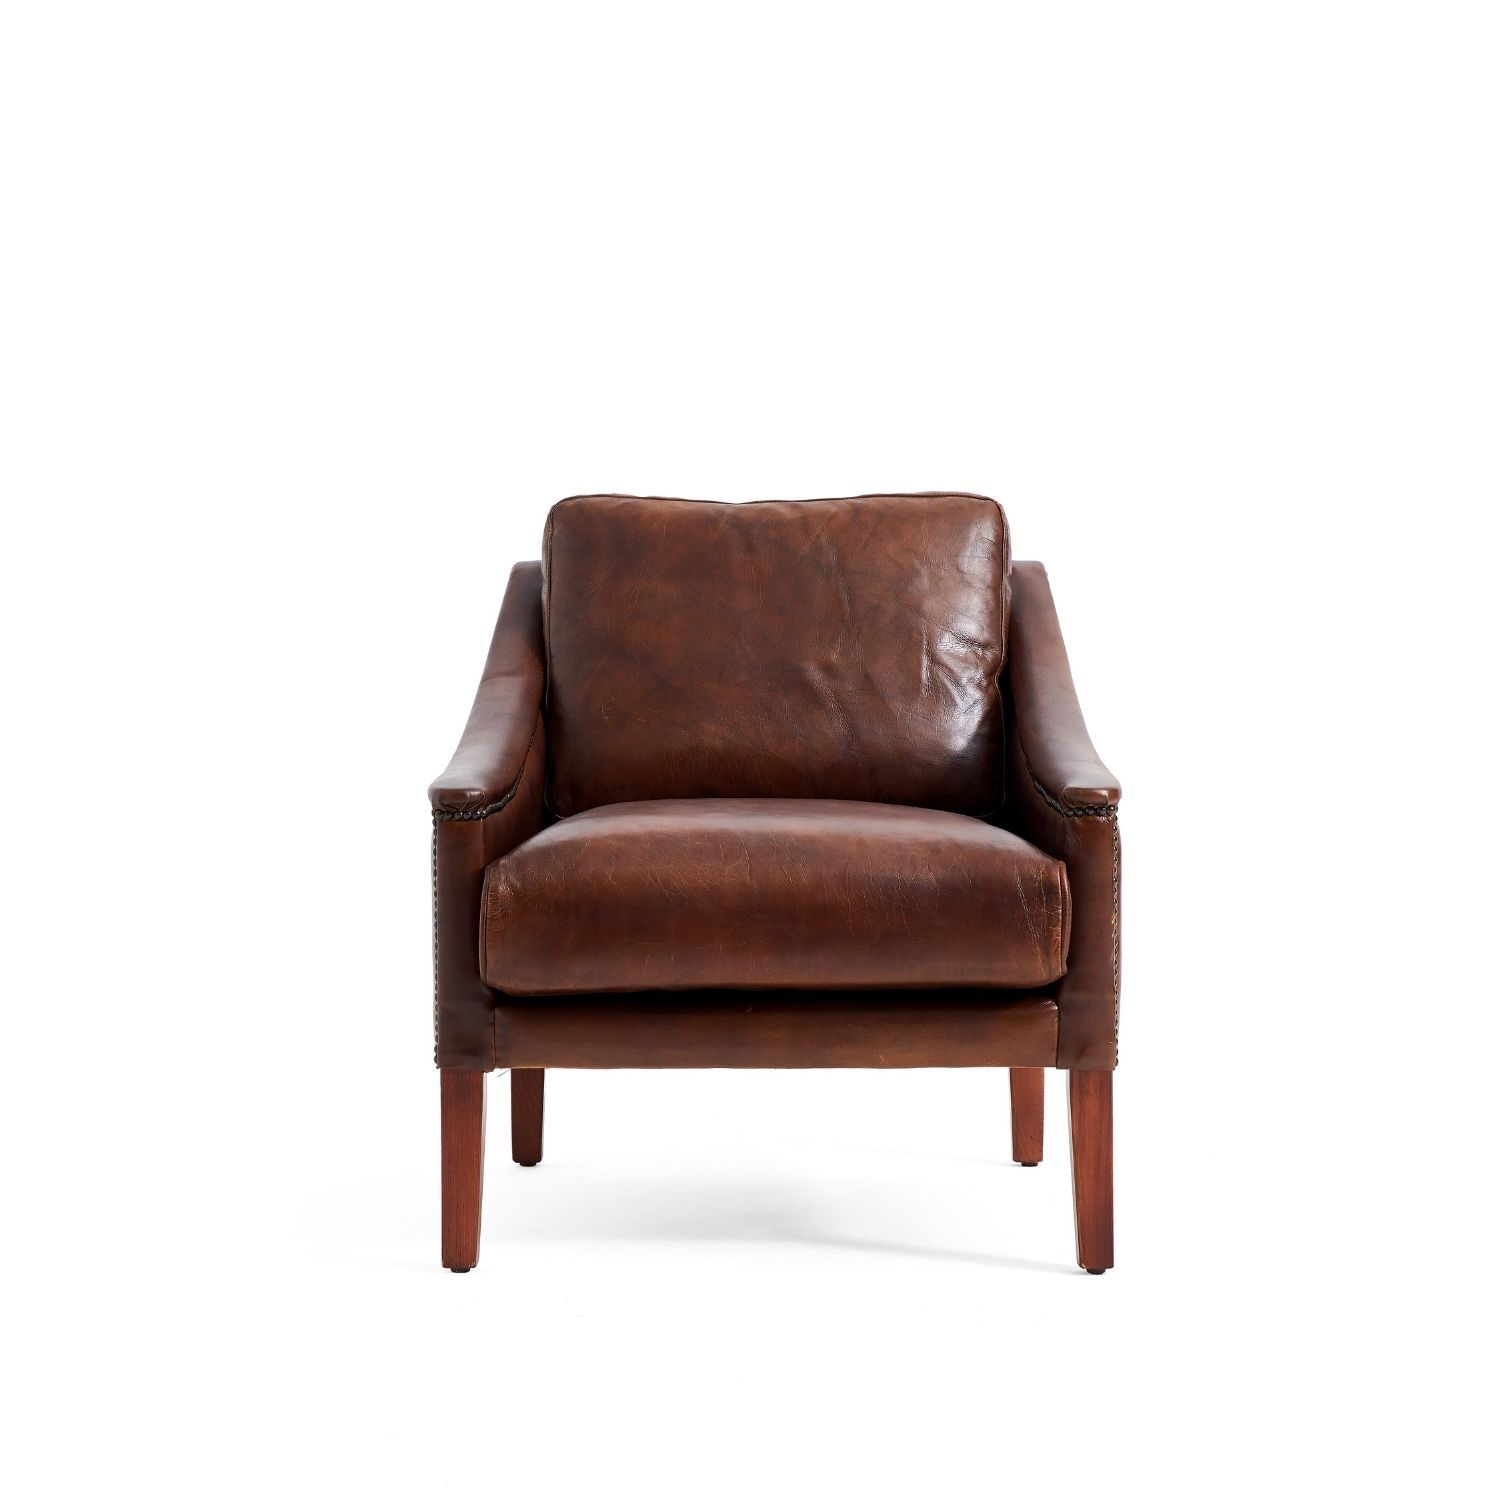 Adze Chair Accent Chair Foundry 